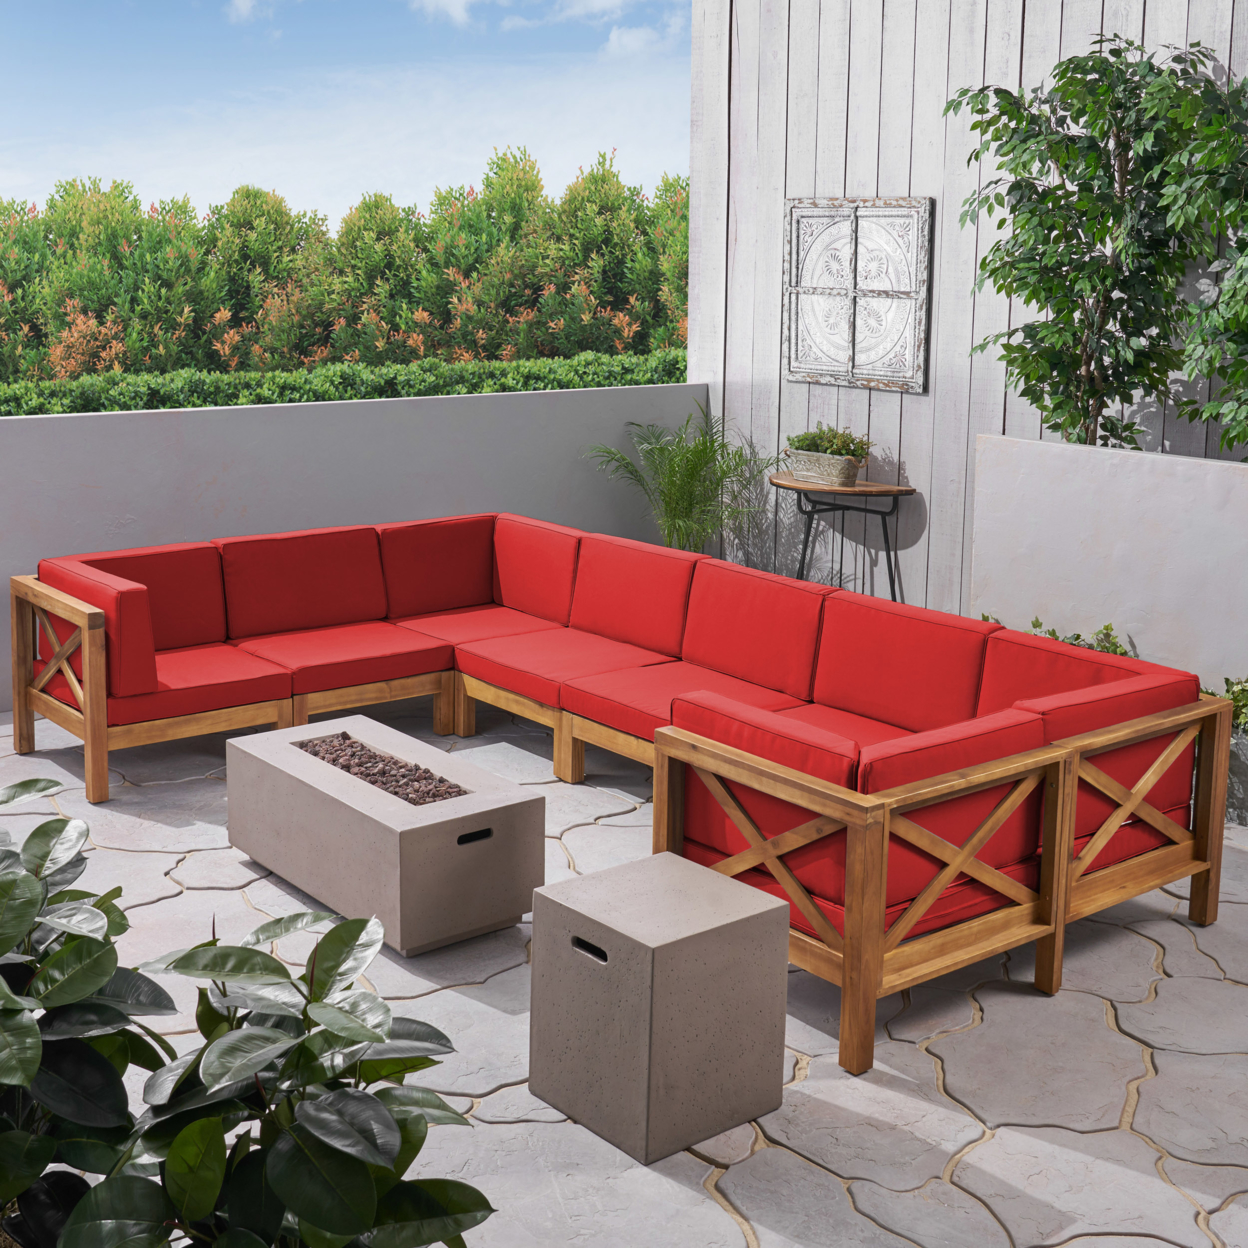 Cytheria Outdoor Acacia Wood 8 Seater U-Shaped Sectional Sofa Set With Fire Pit - Gray / Dark Gray